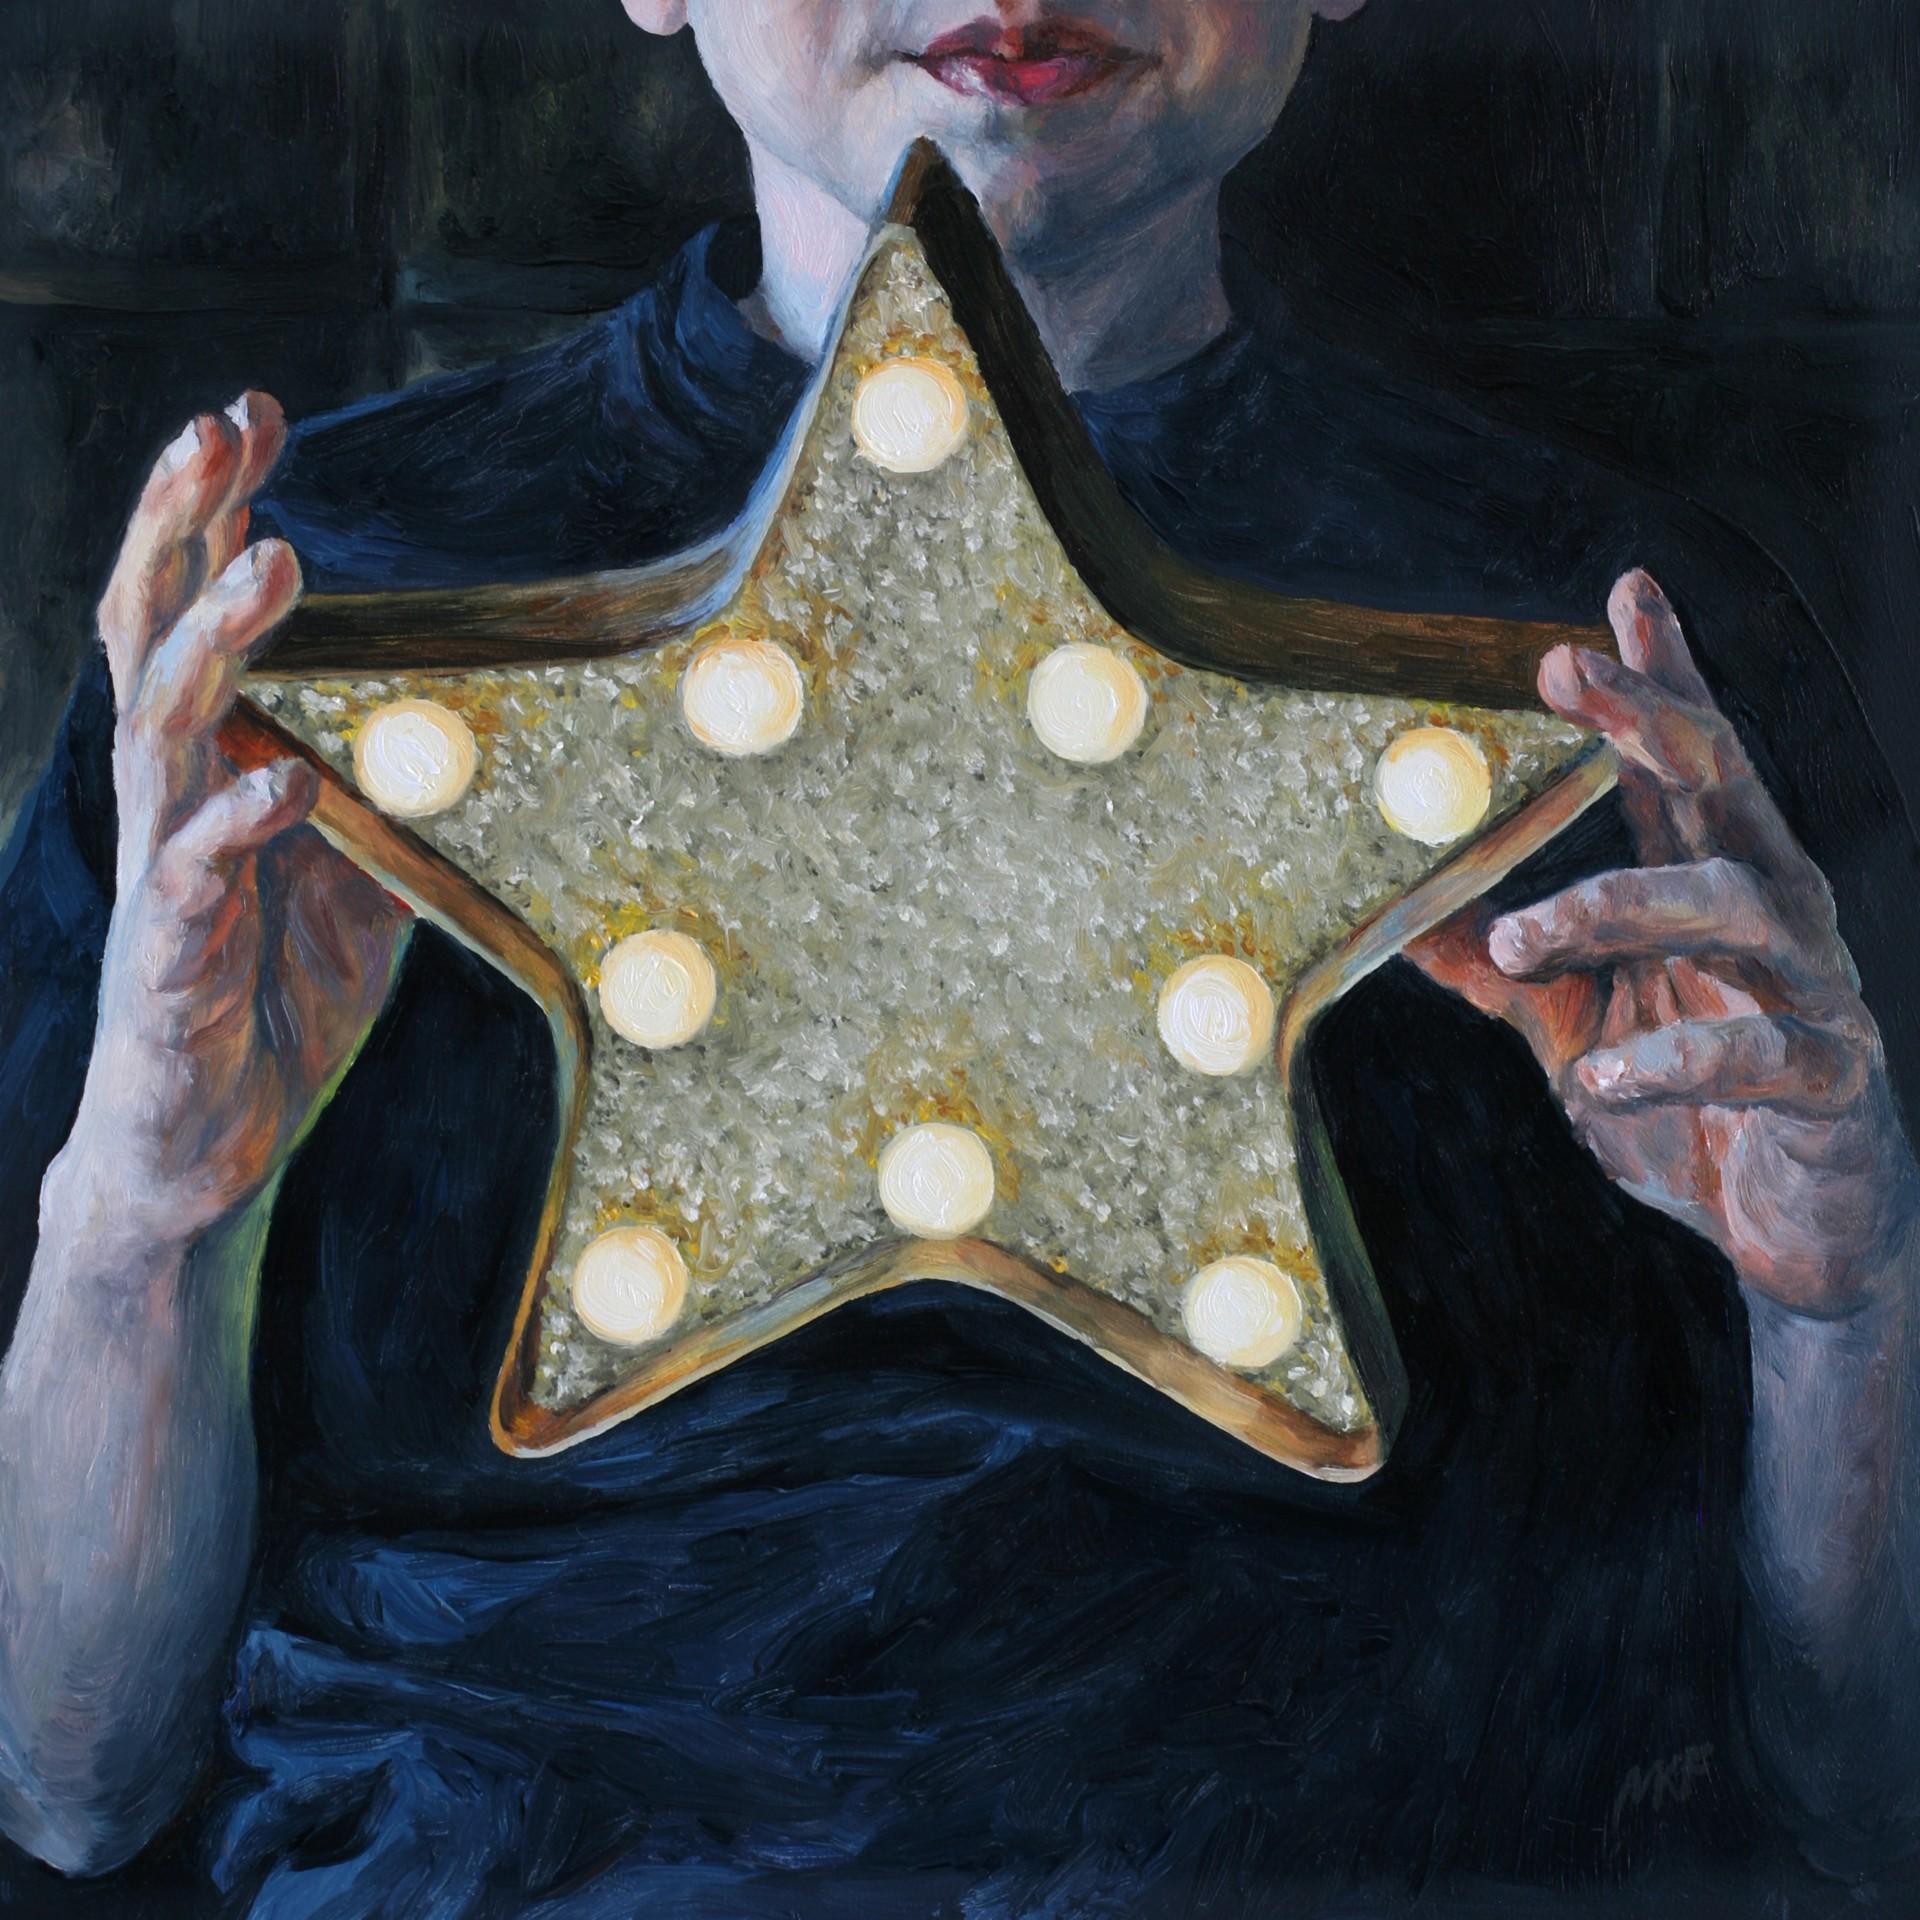 The Star in my hands - Art by Marianna Foster